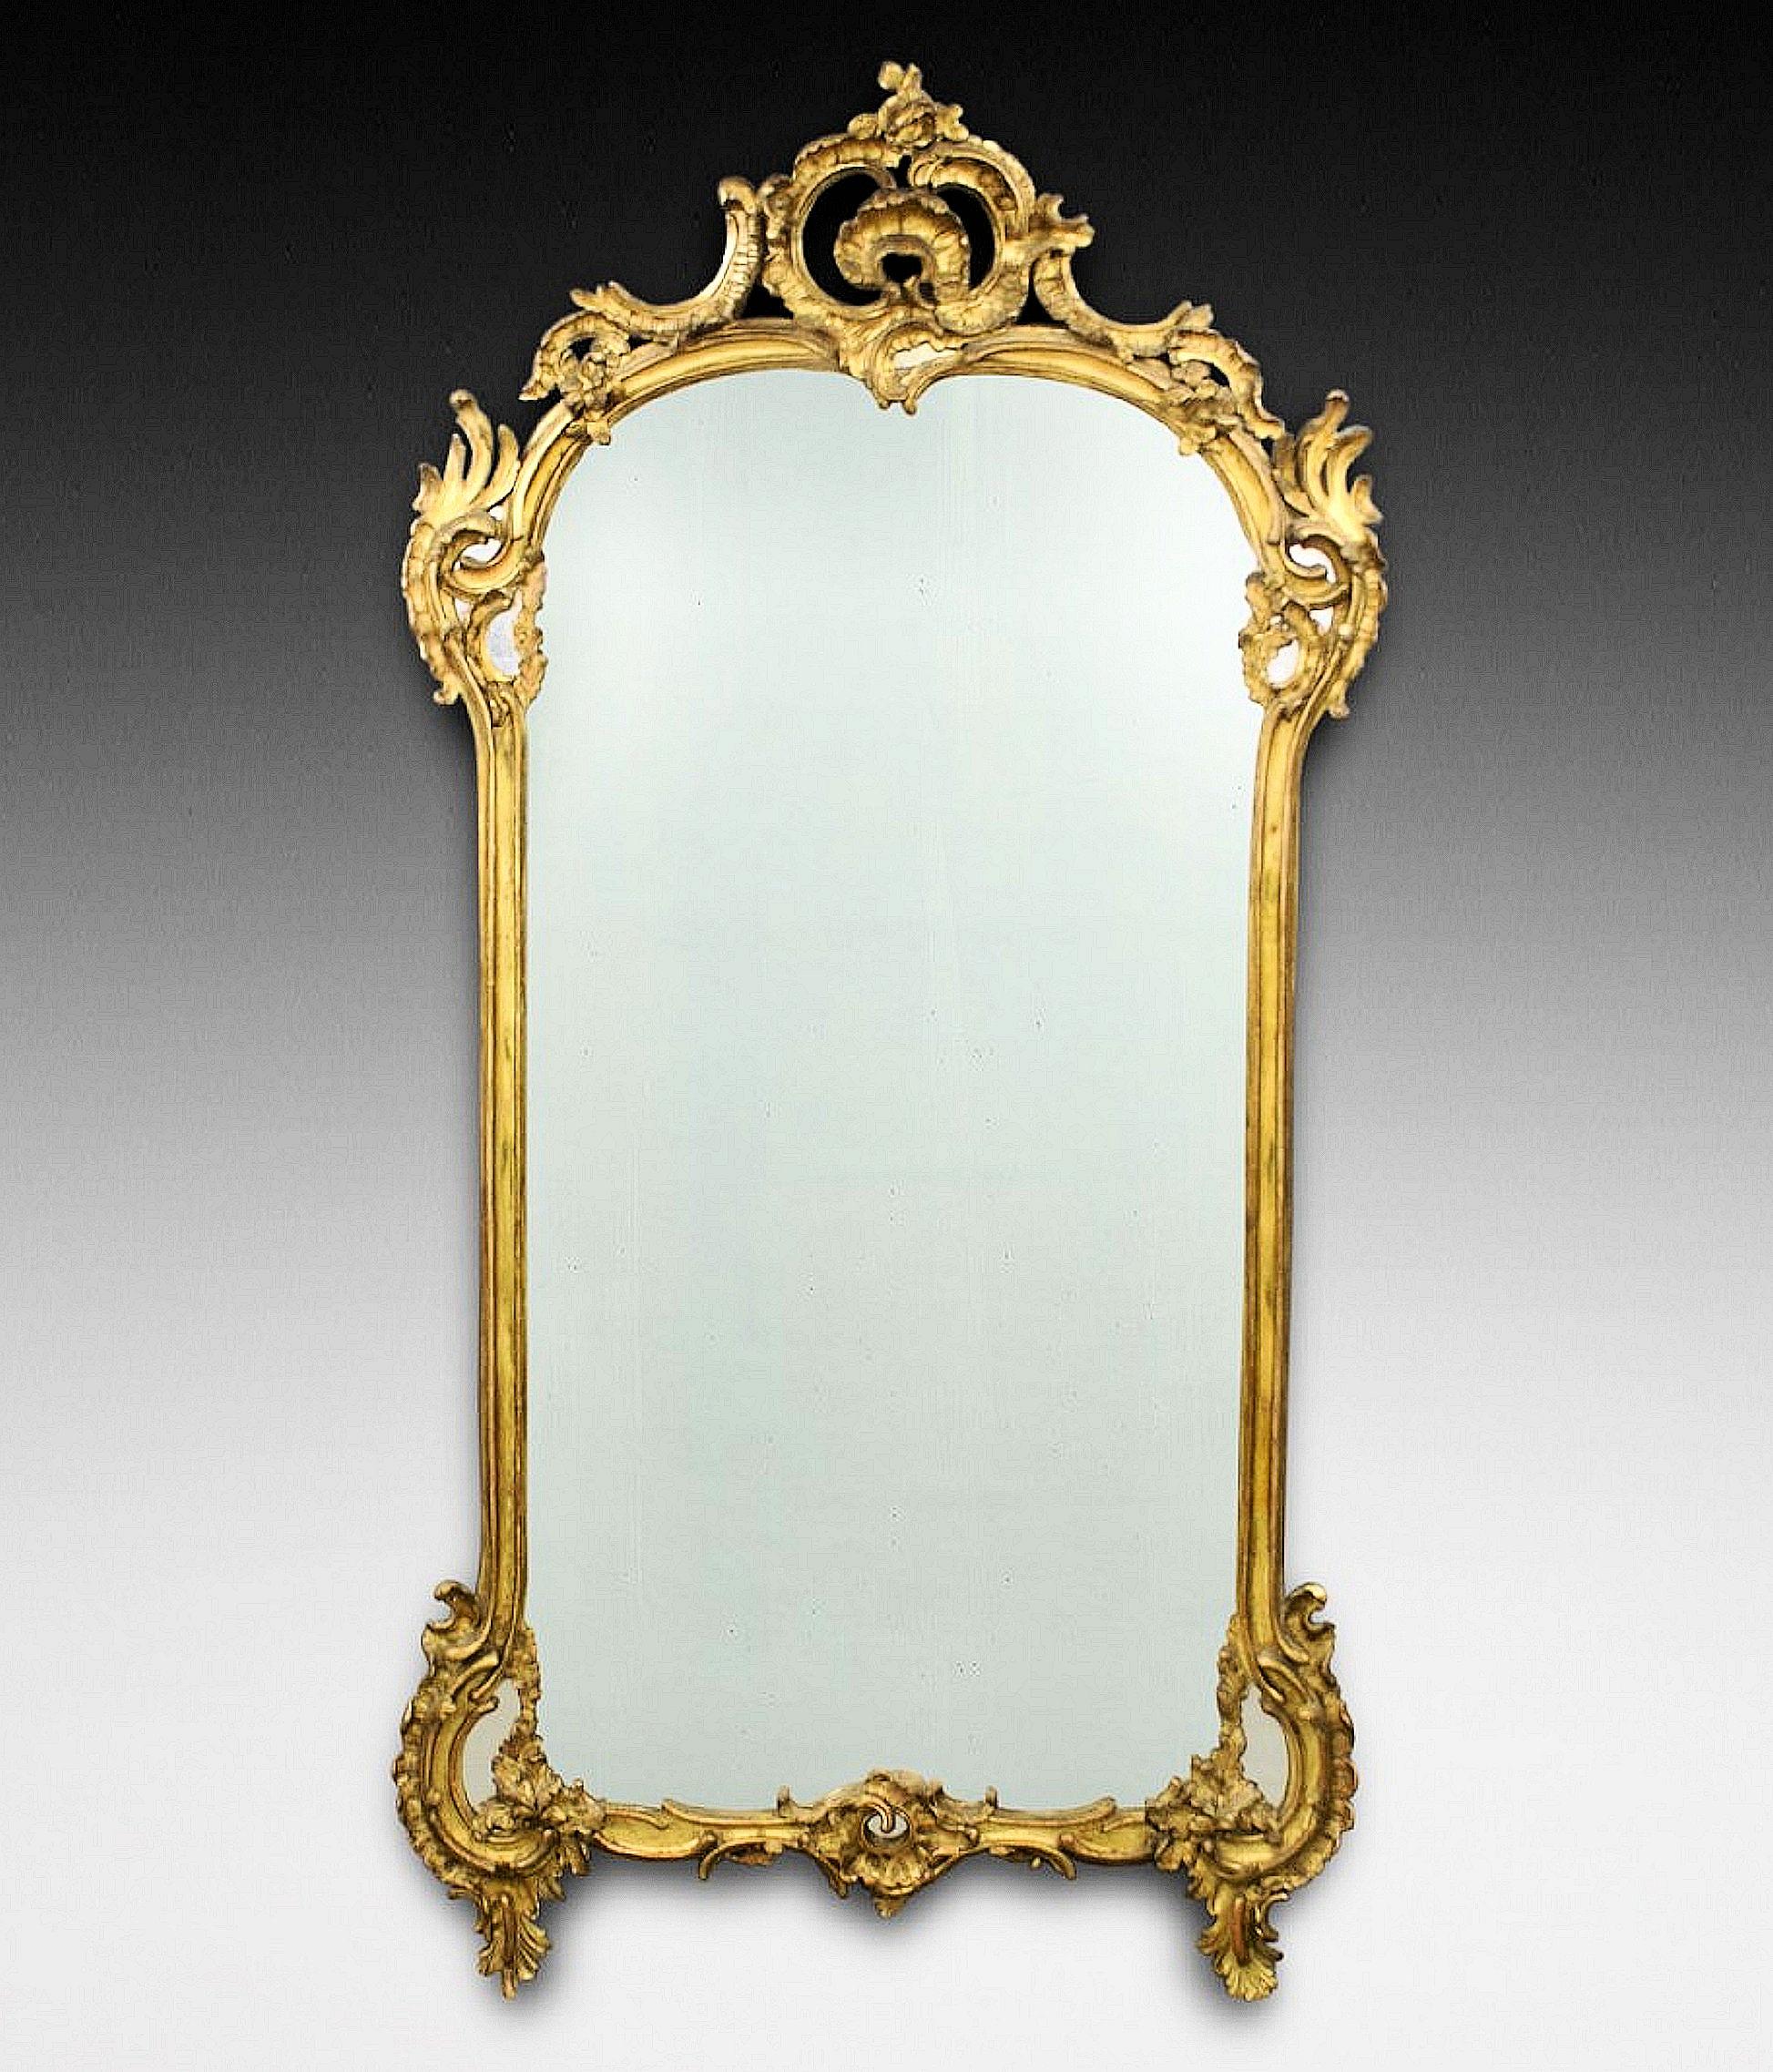 Oversized 19th c. French Ornate Gilt Mirror For Sale 2